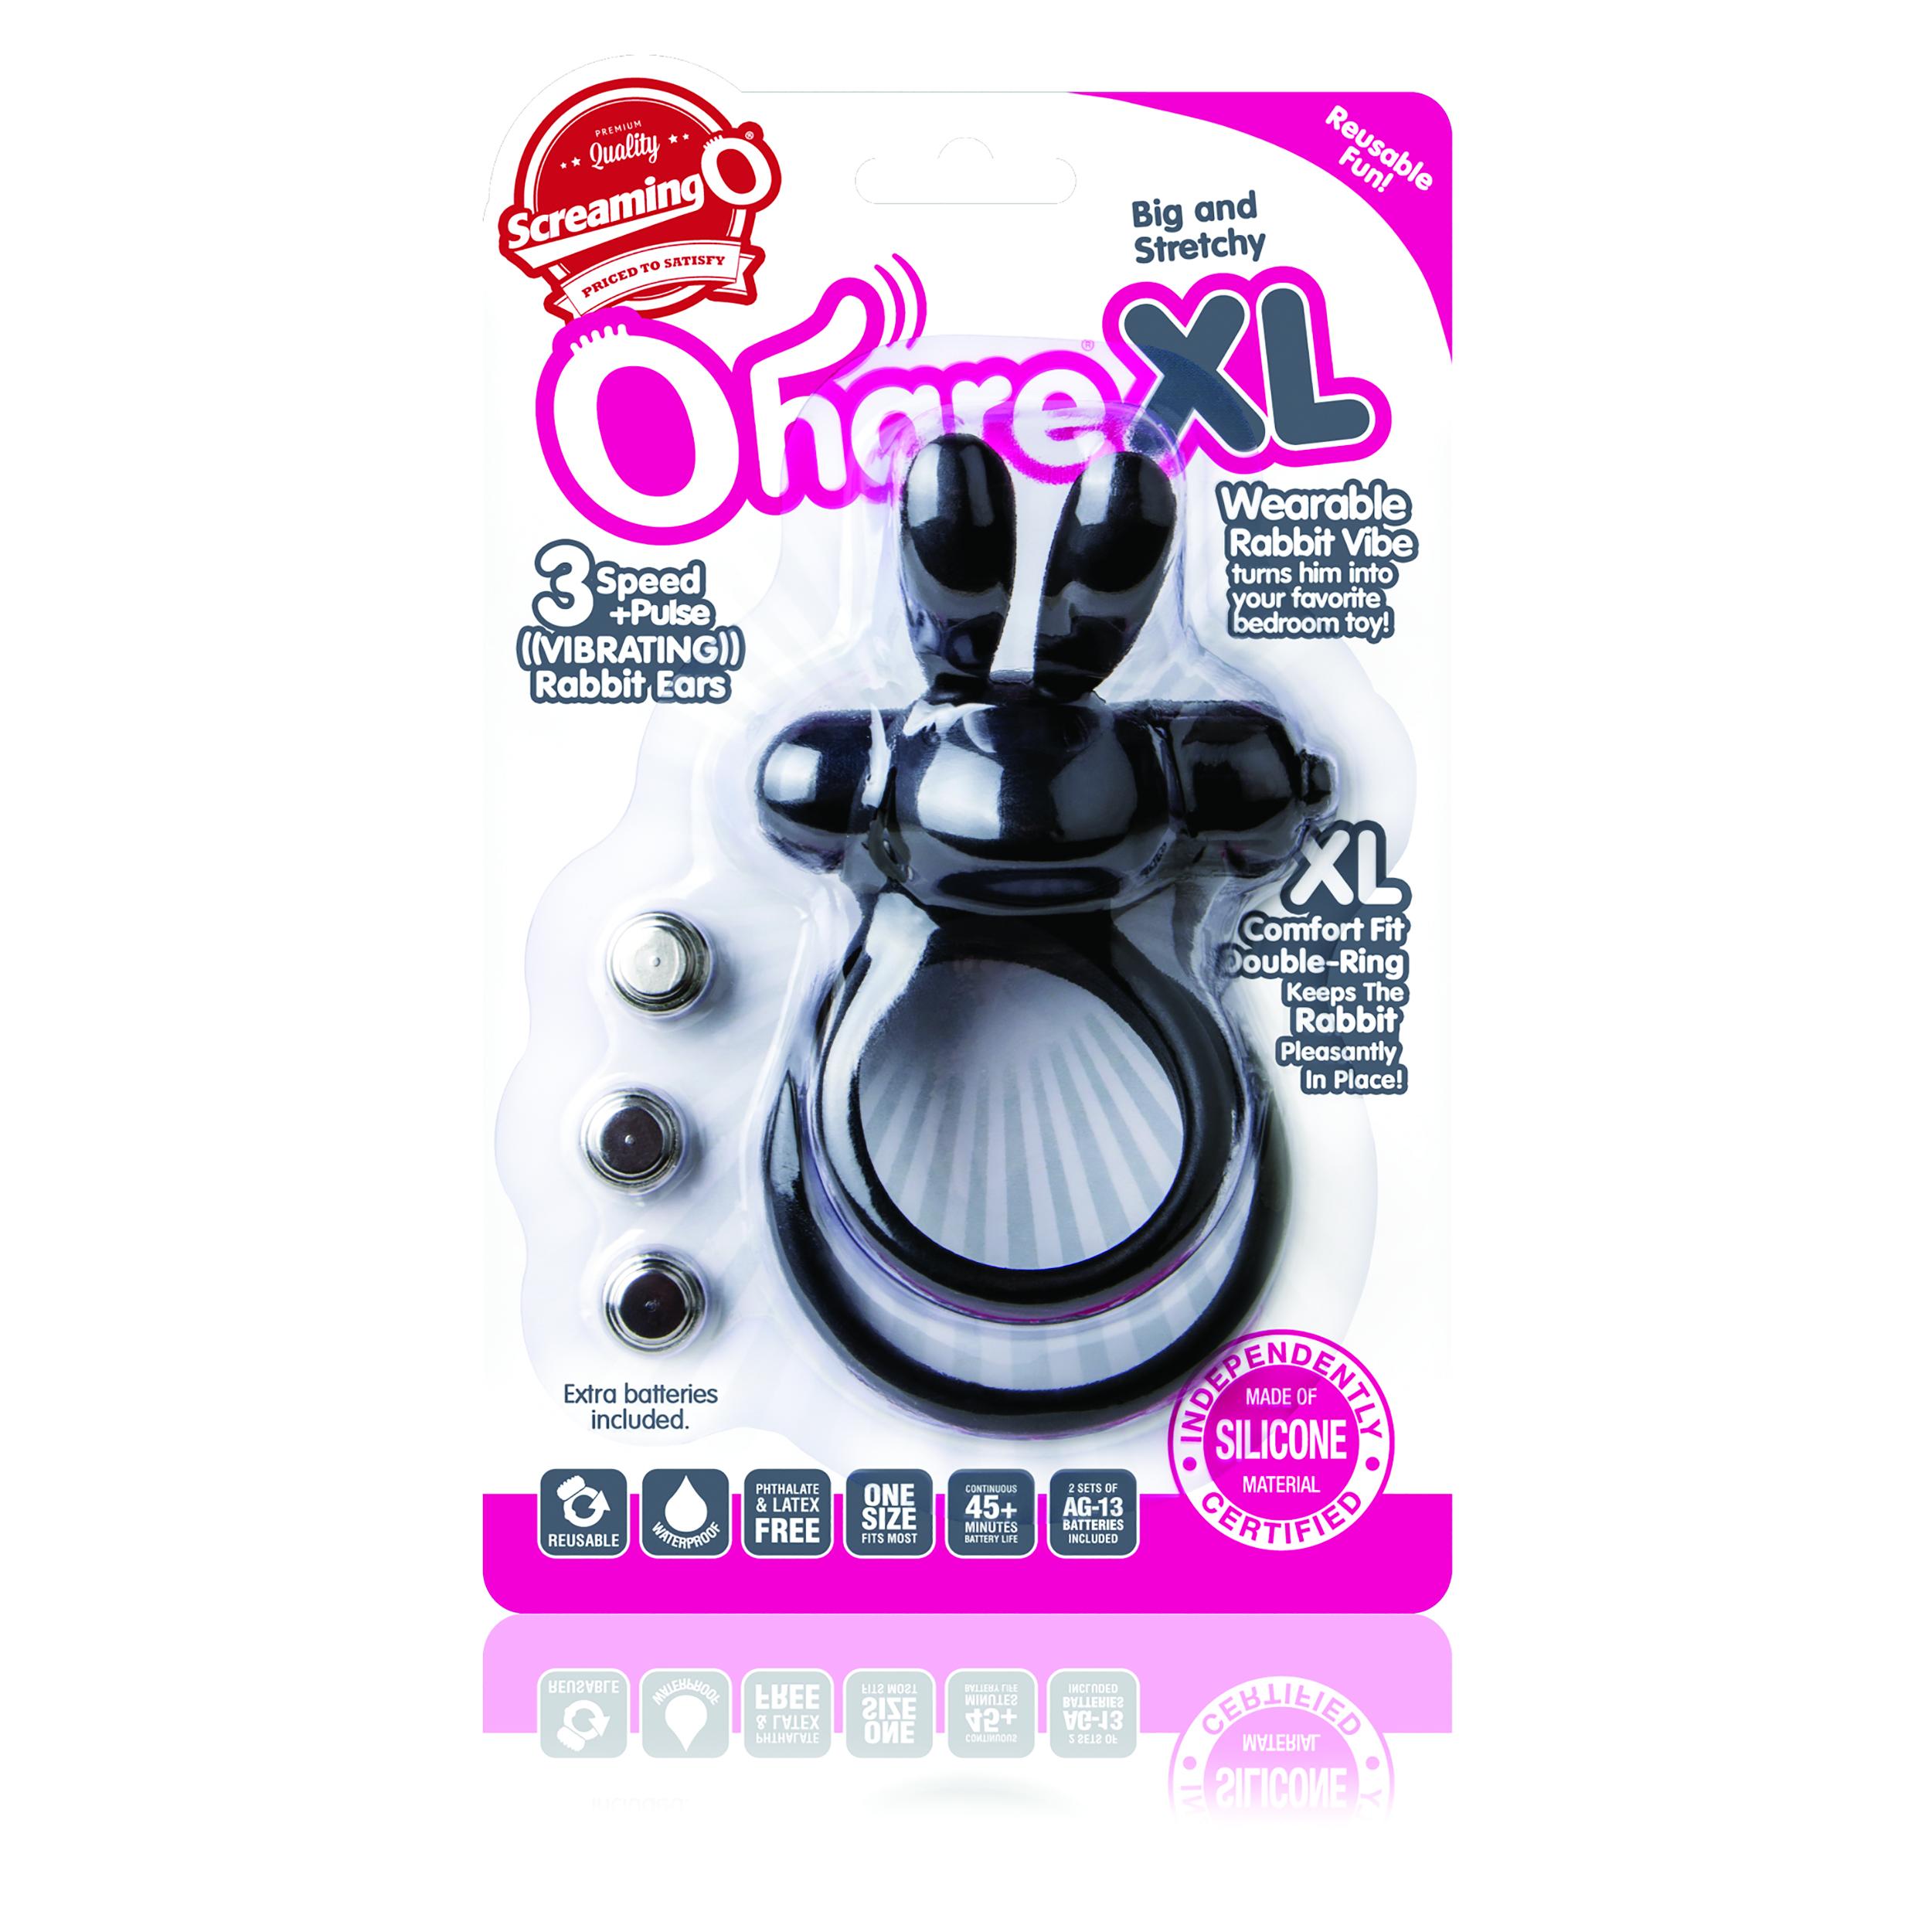 The Screaming O - The Ohare Xl Black